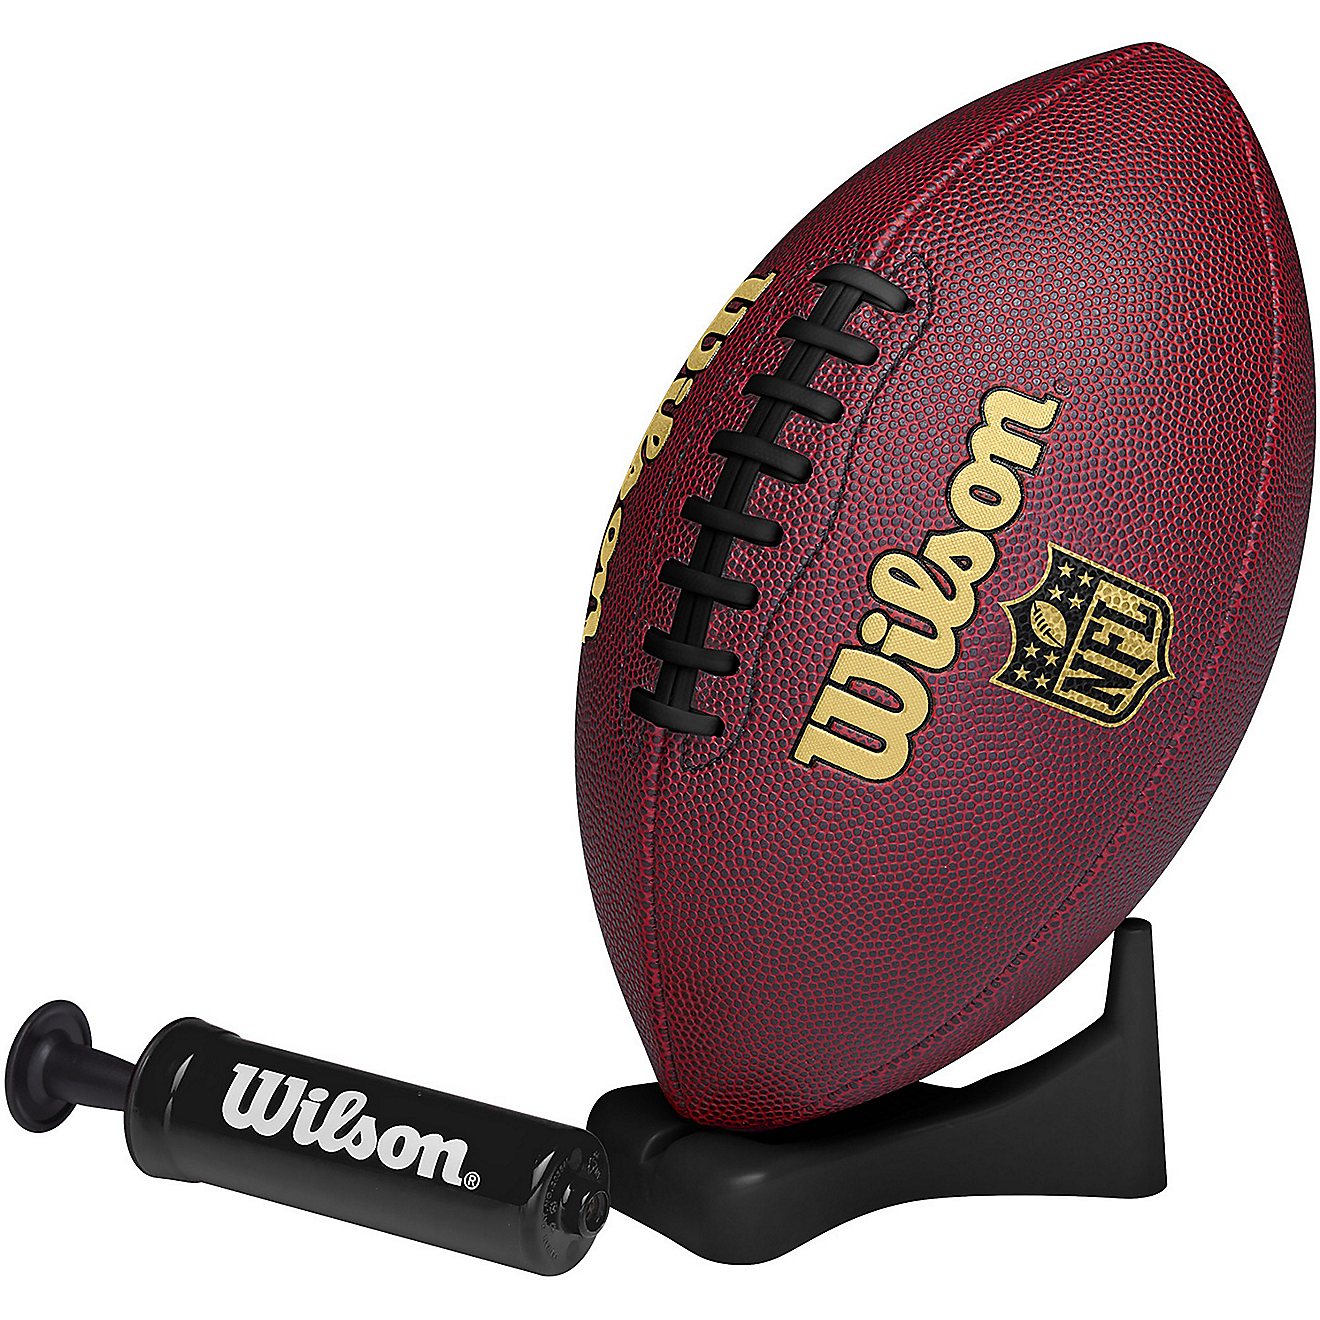 Wilson NFL Tailgate Football                                                                                                     - view number 1